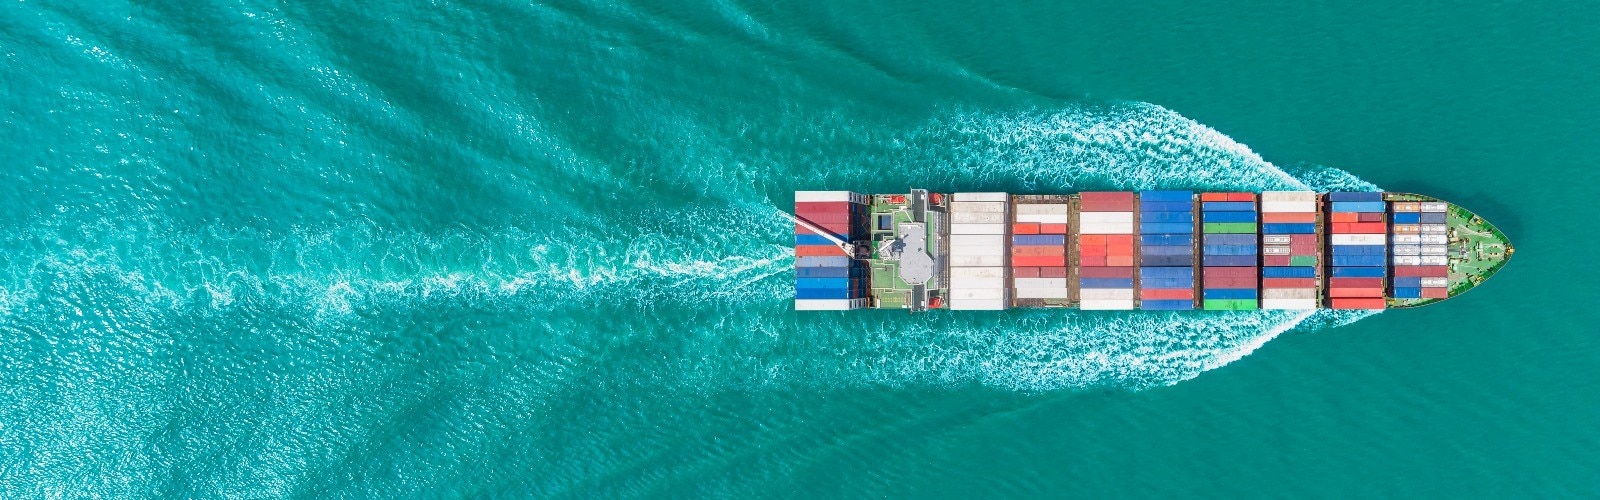 Image of  container ship on the ocean